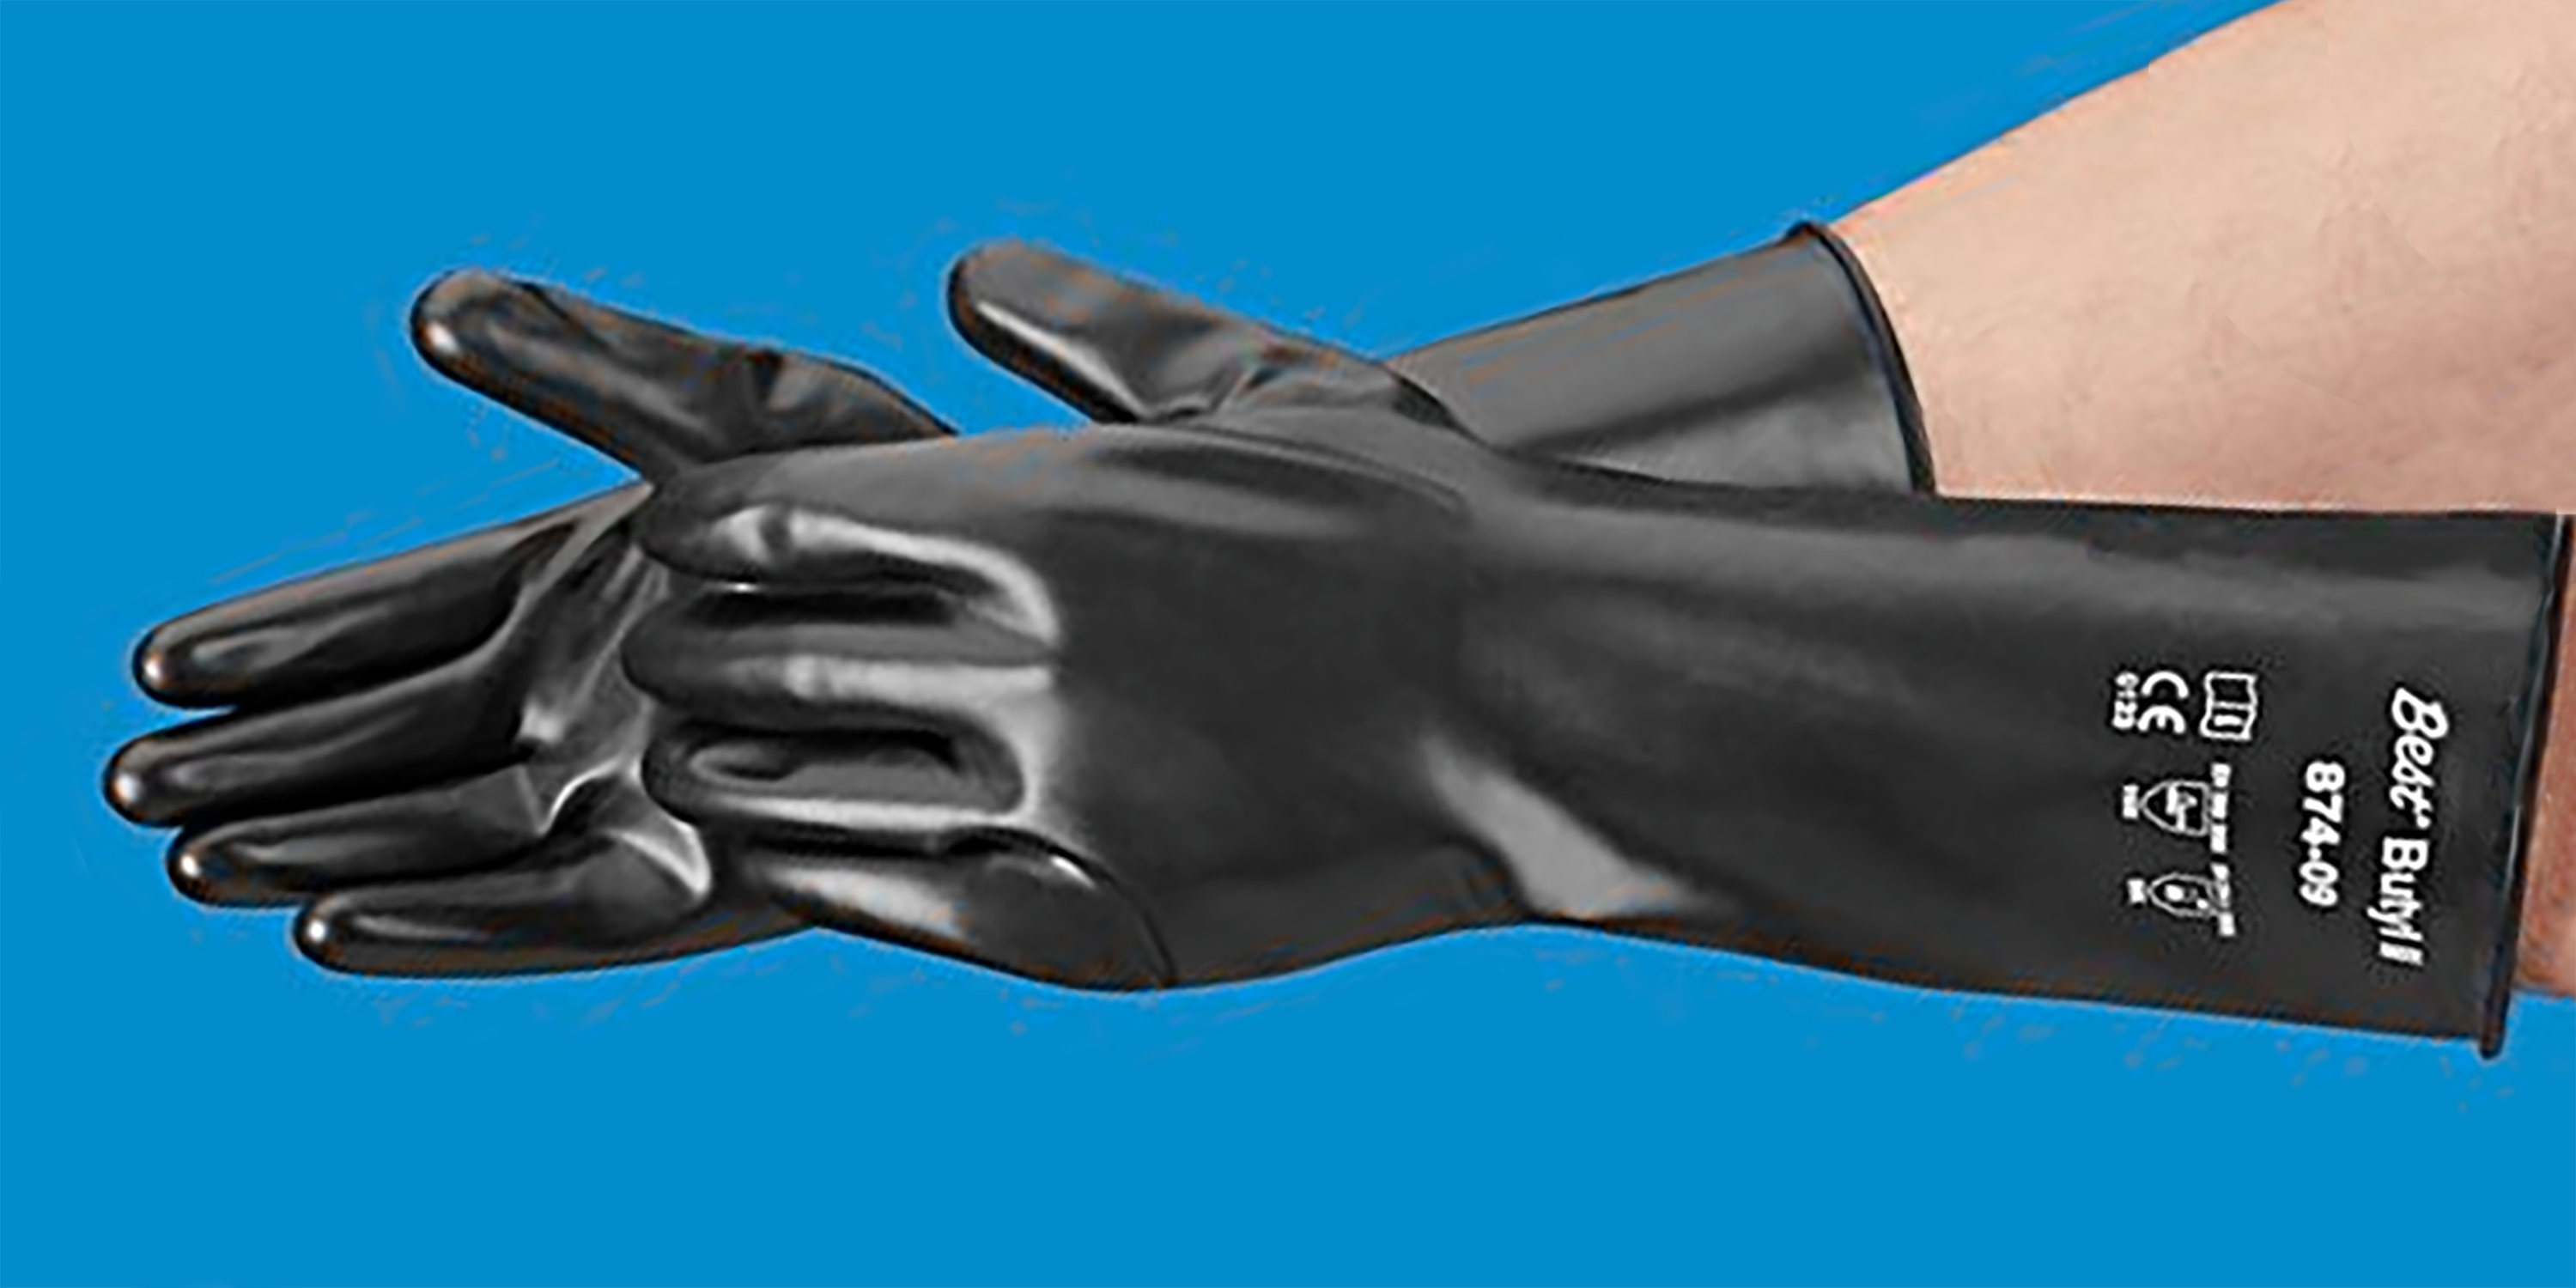 Black gloves made out of butyl rubber.